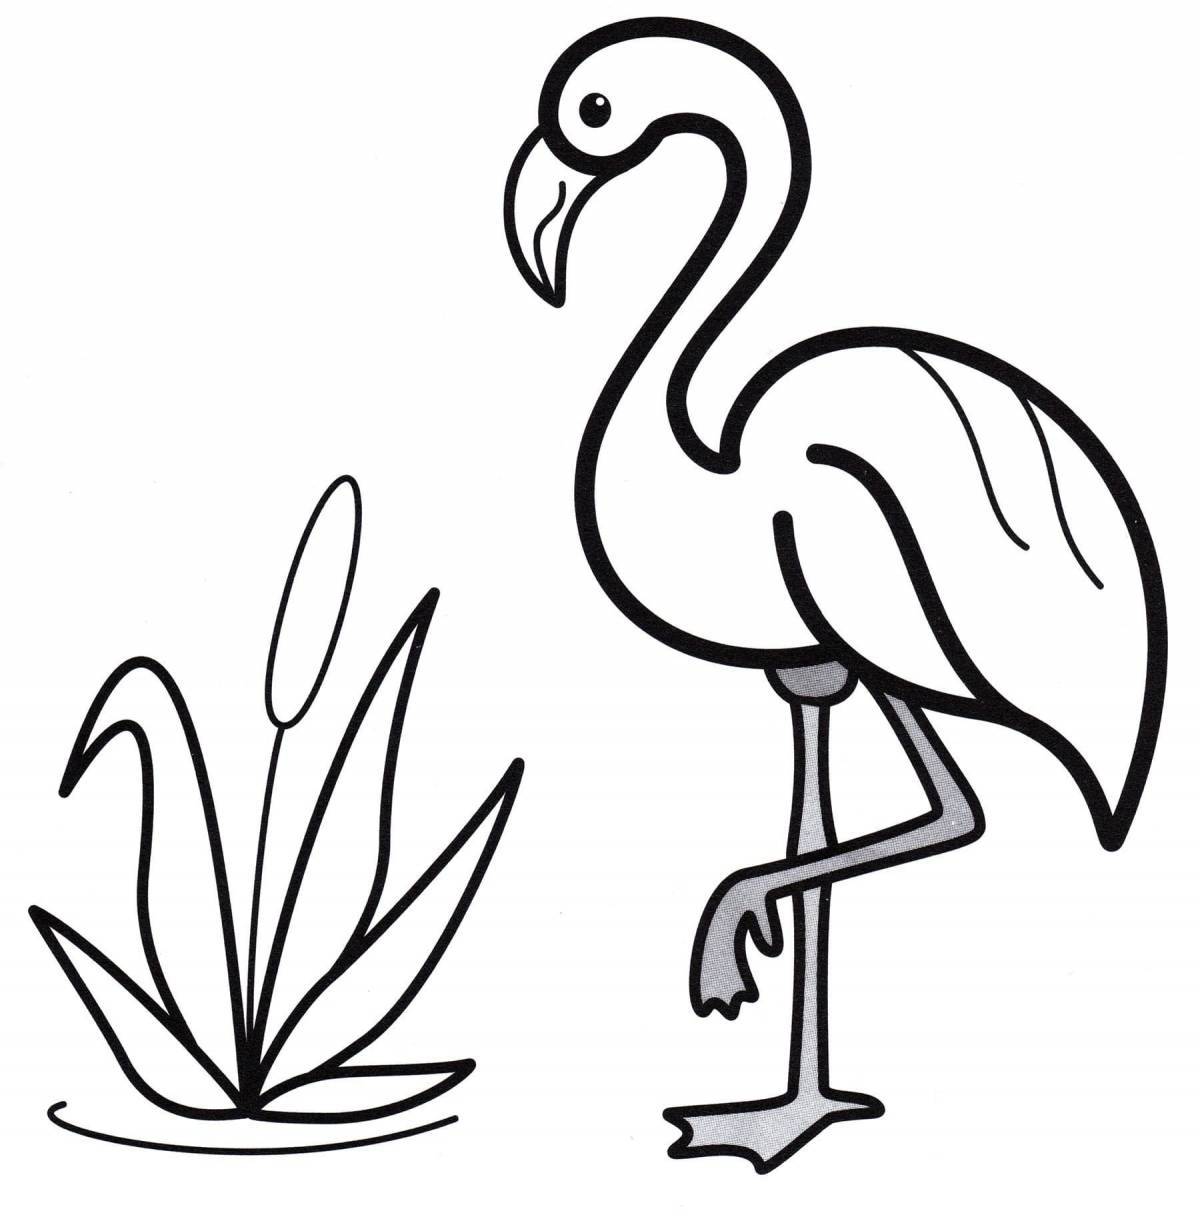 Glowing flamingo coloring pages for kids